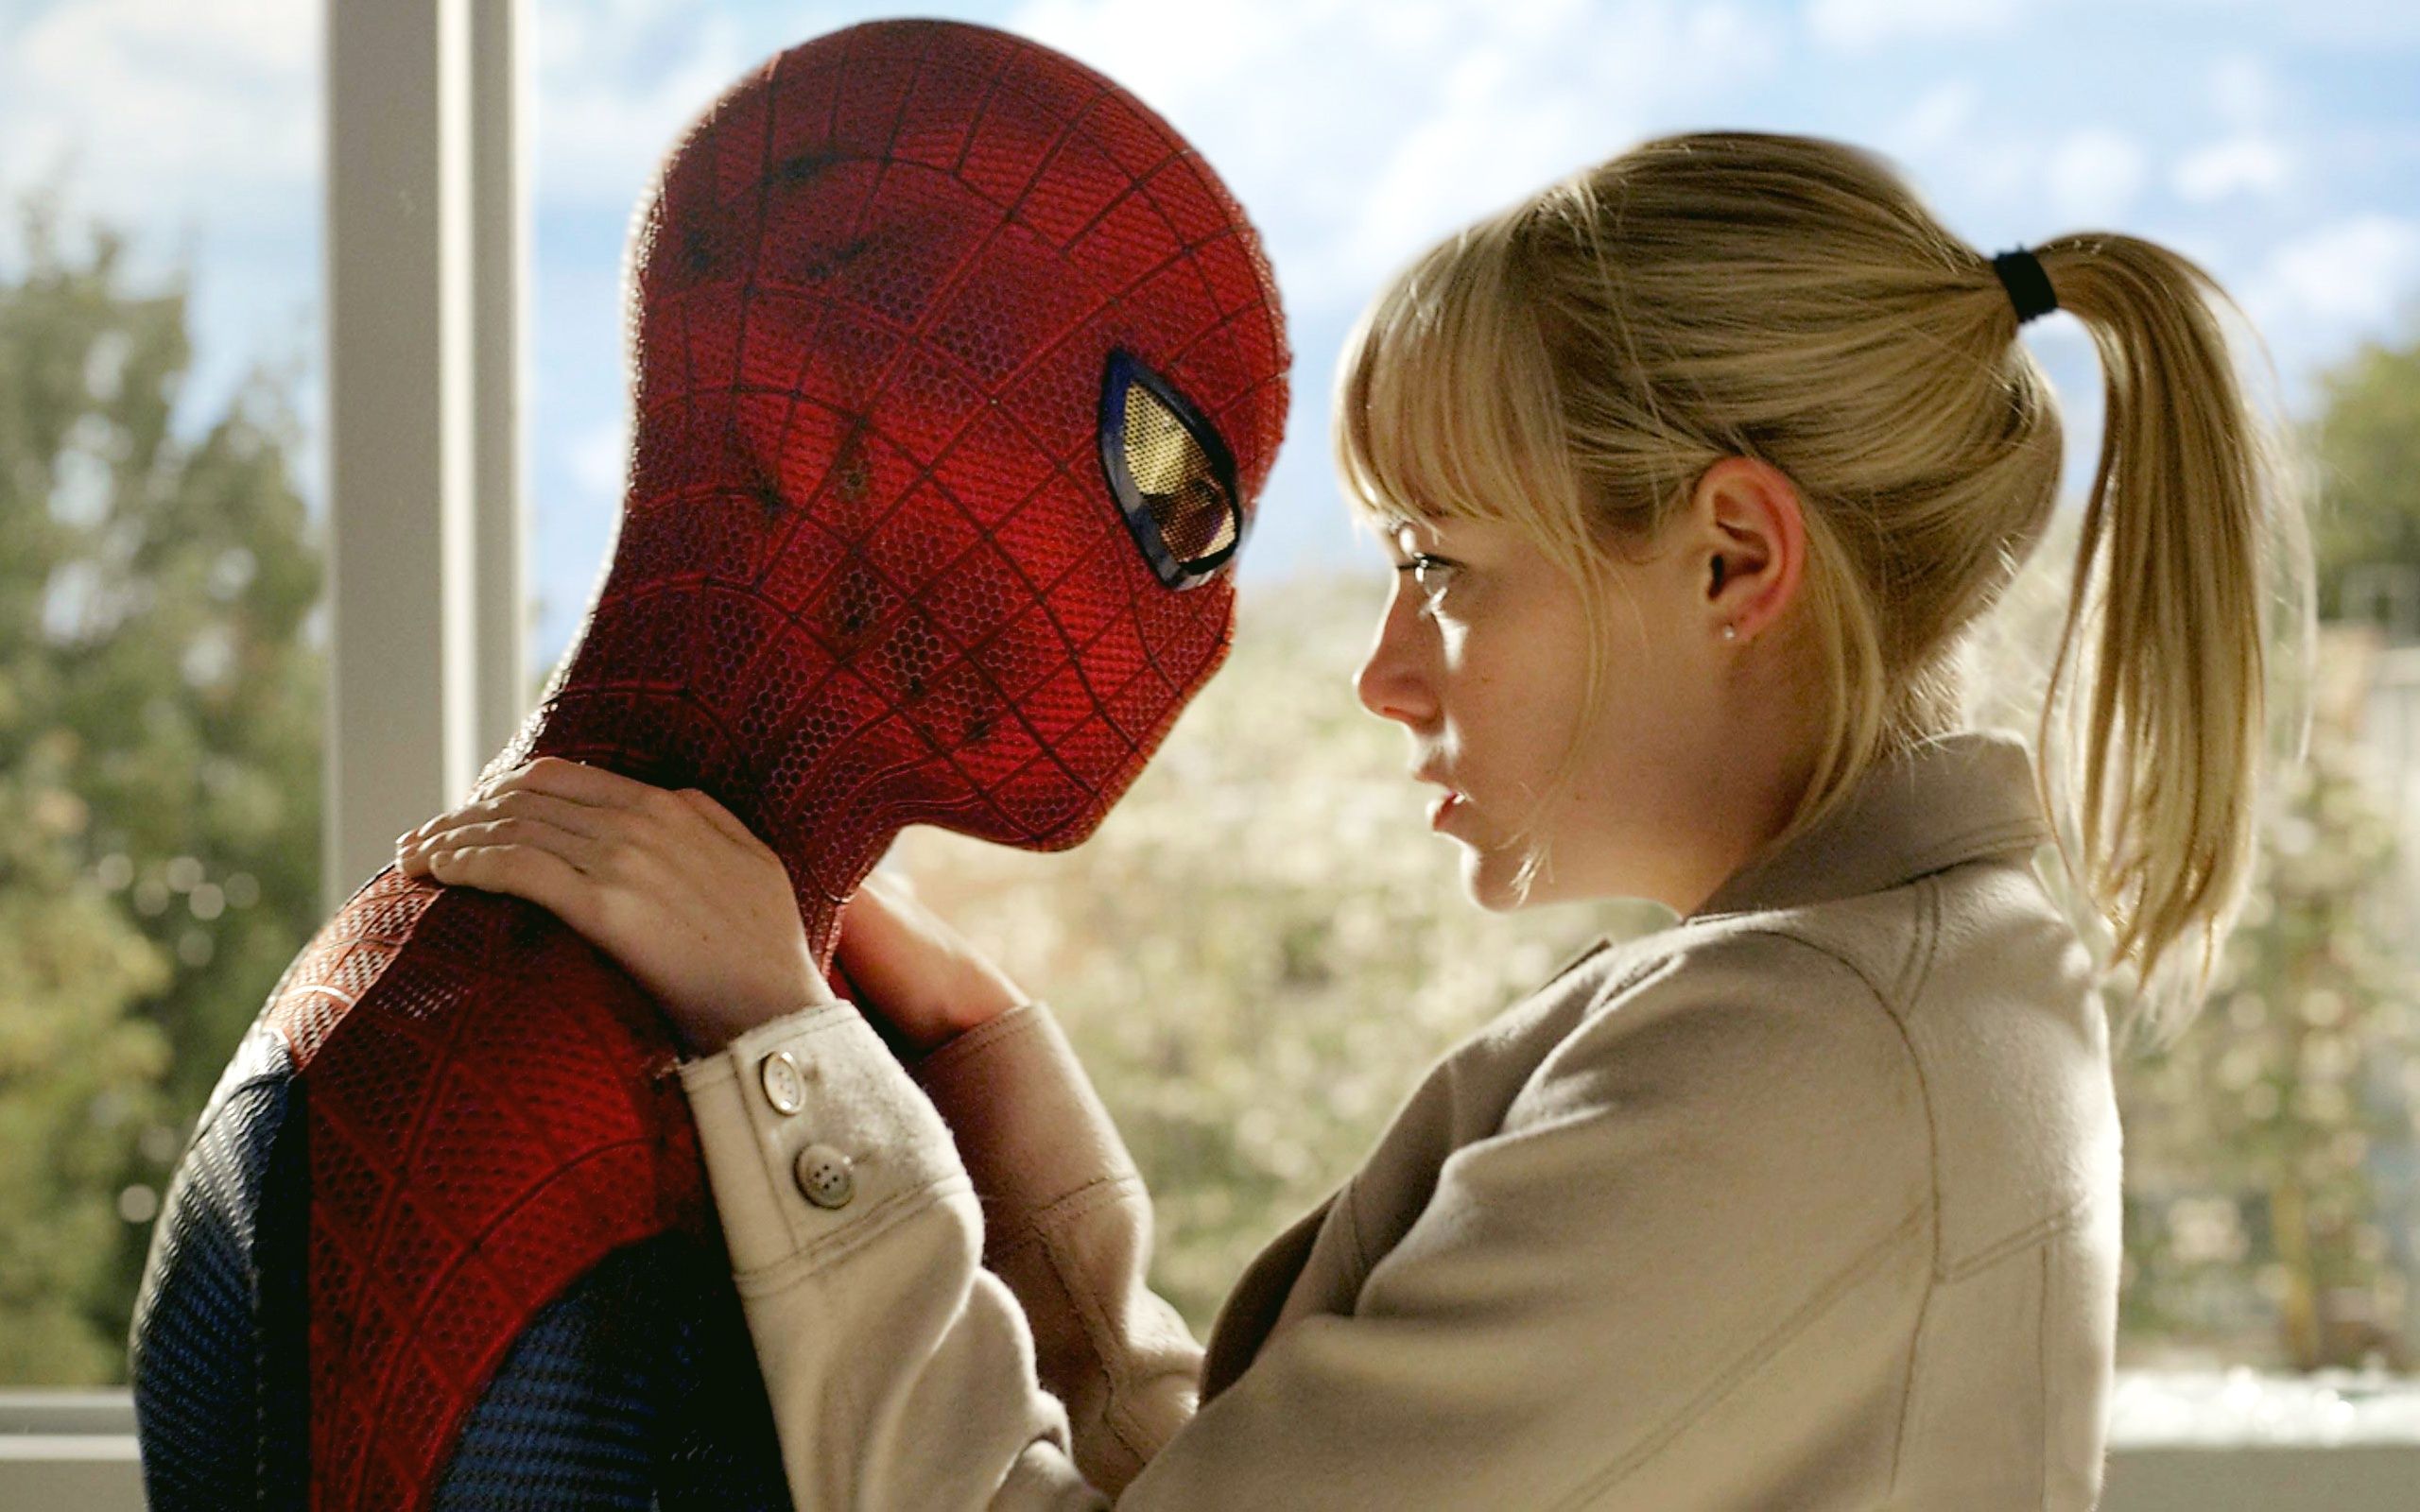 Spider Man and Gwen Stacy Wallpaper in jpg format for free download